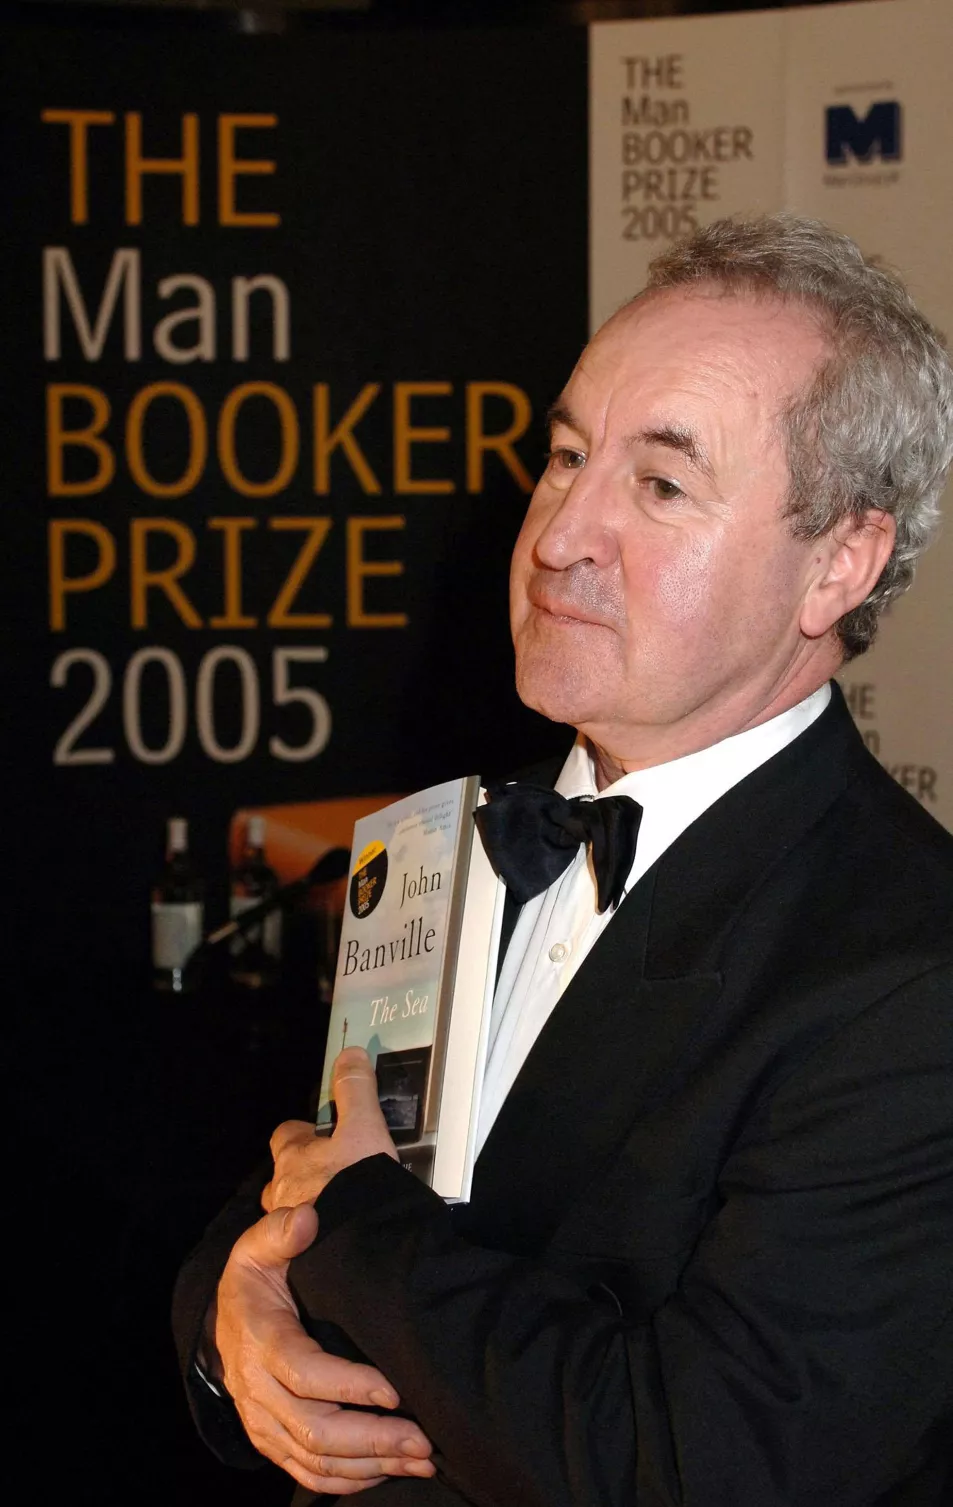 John Banville when he won the Man Booker Prize in 2005